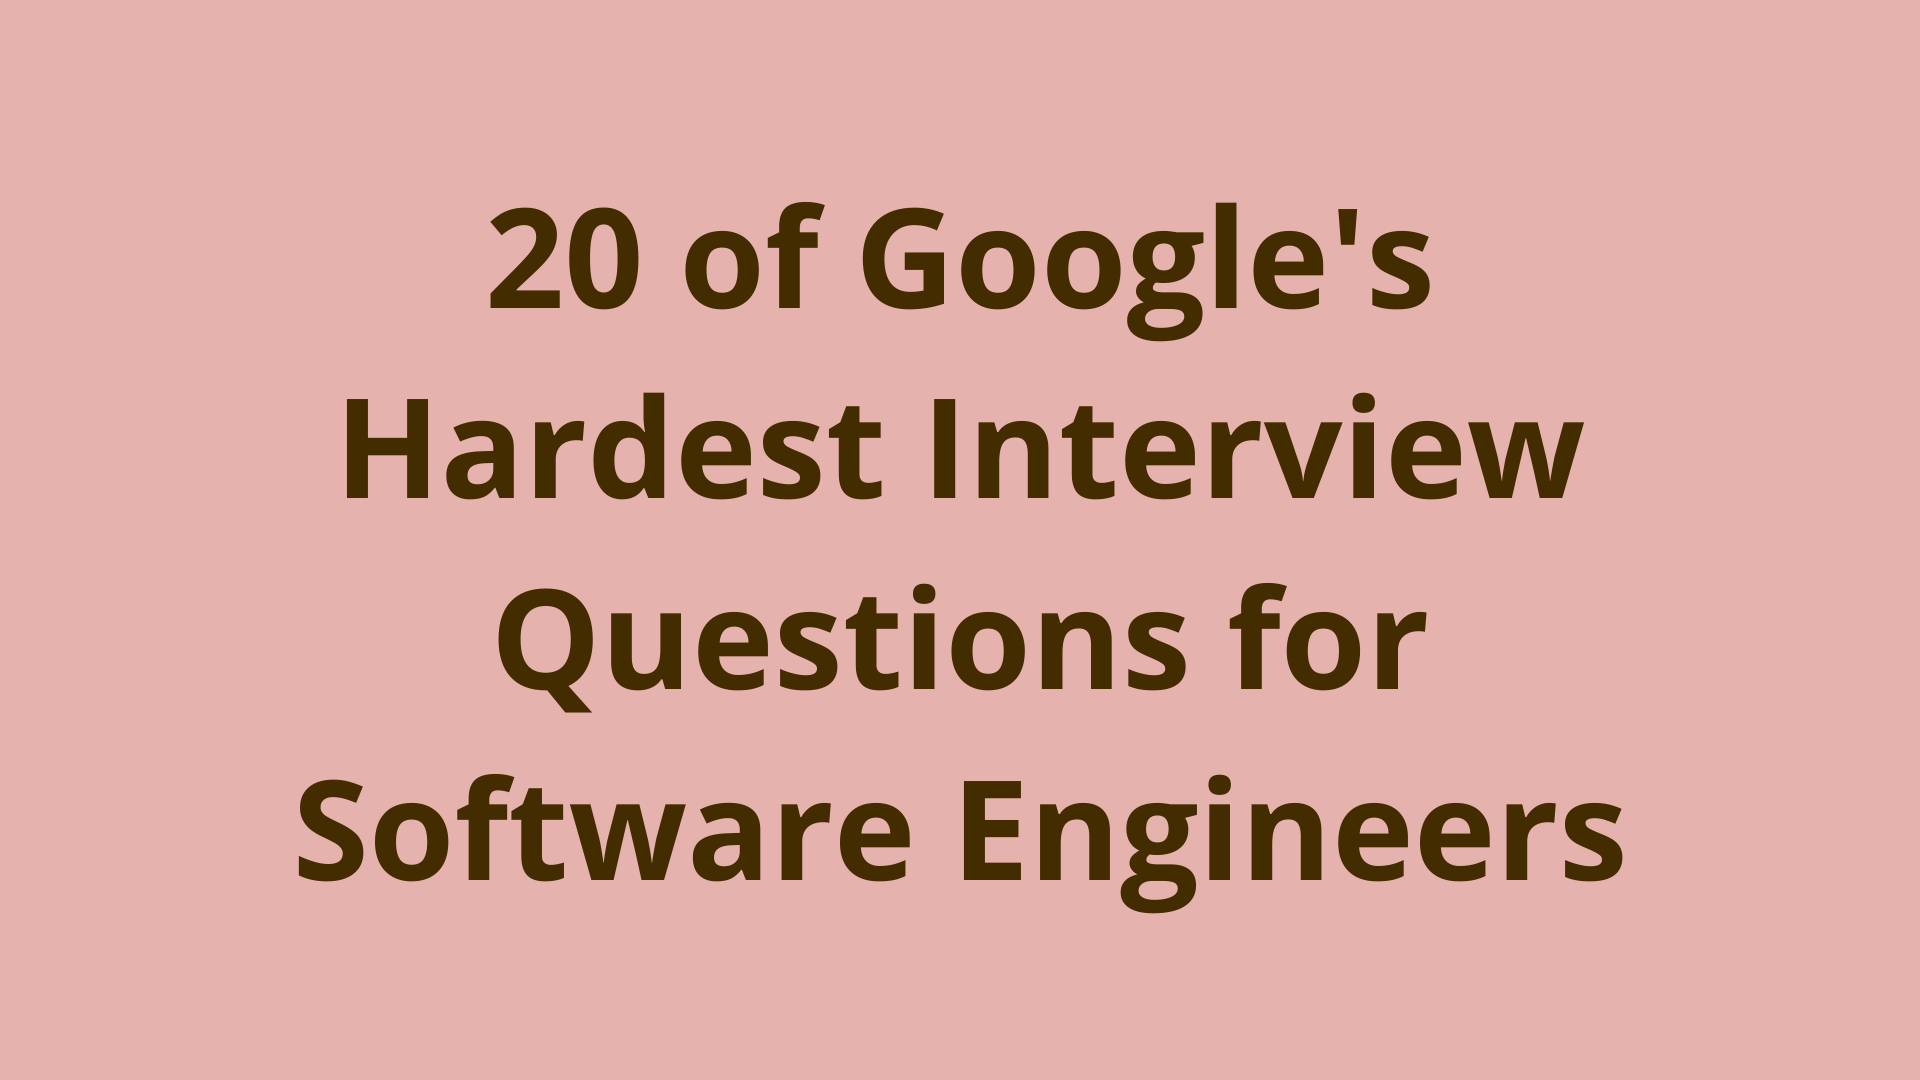 Image of 20 of Google's hardest interview questions for software engineers